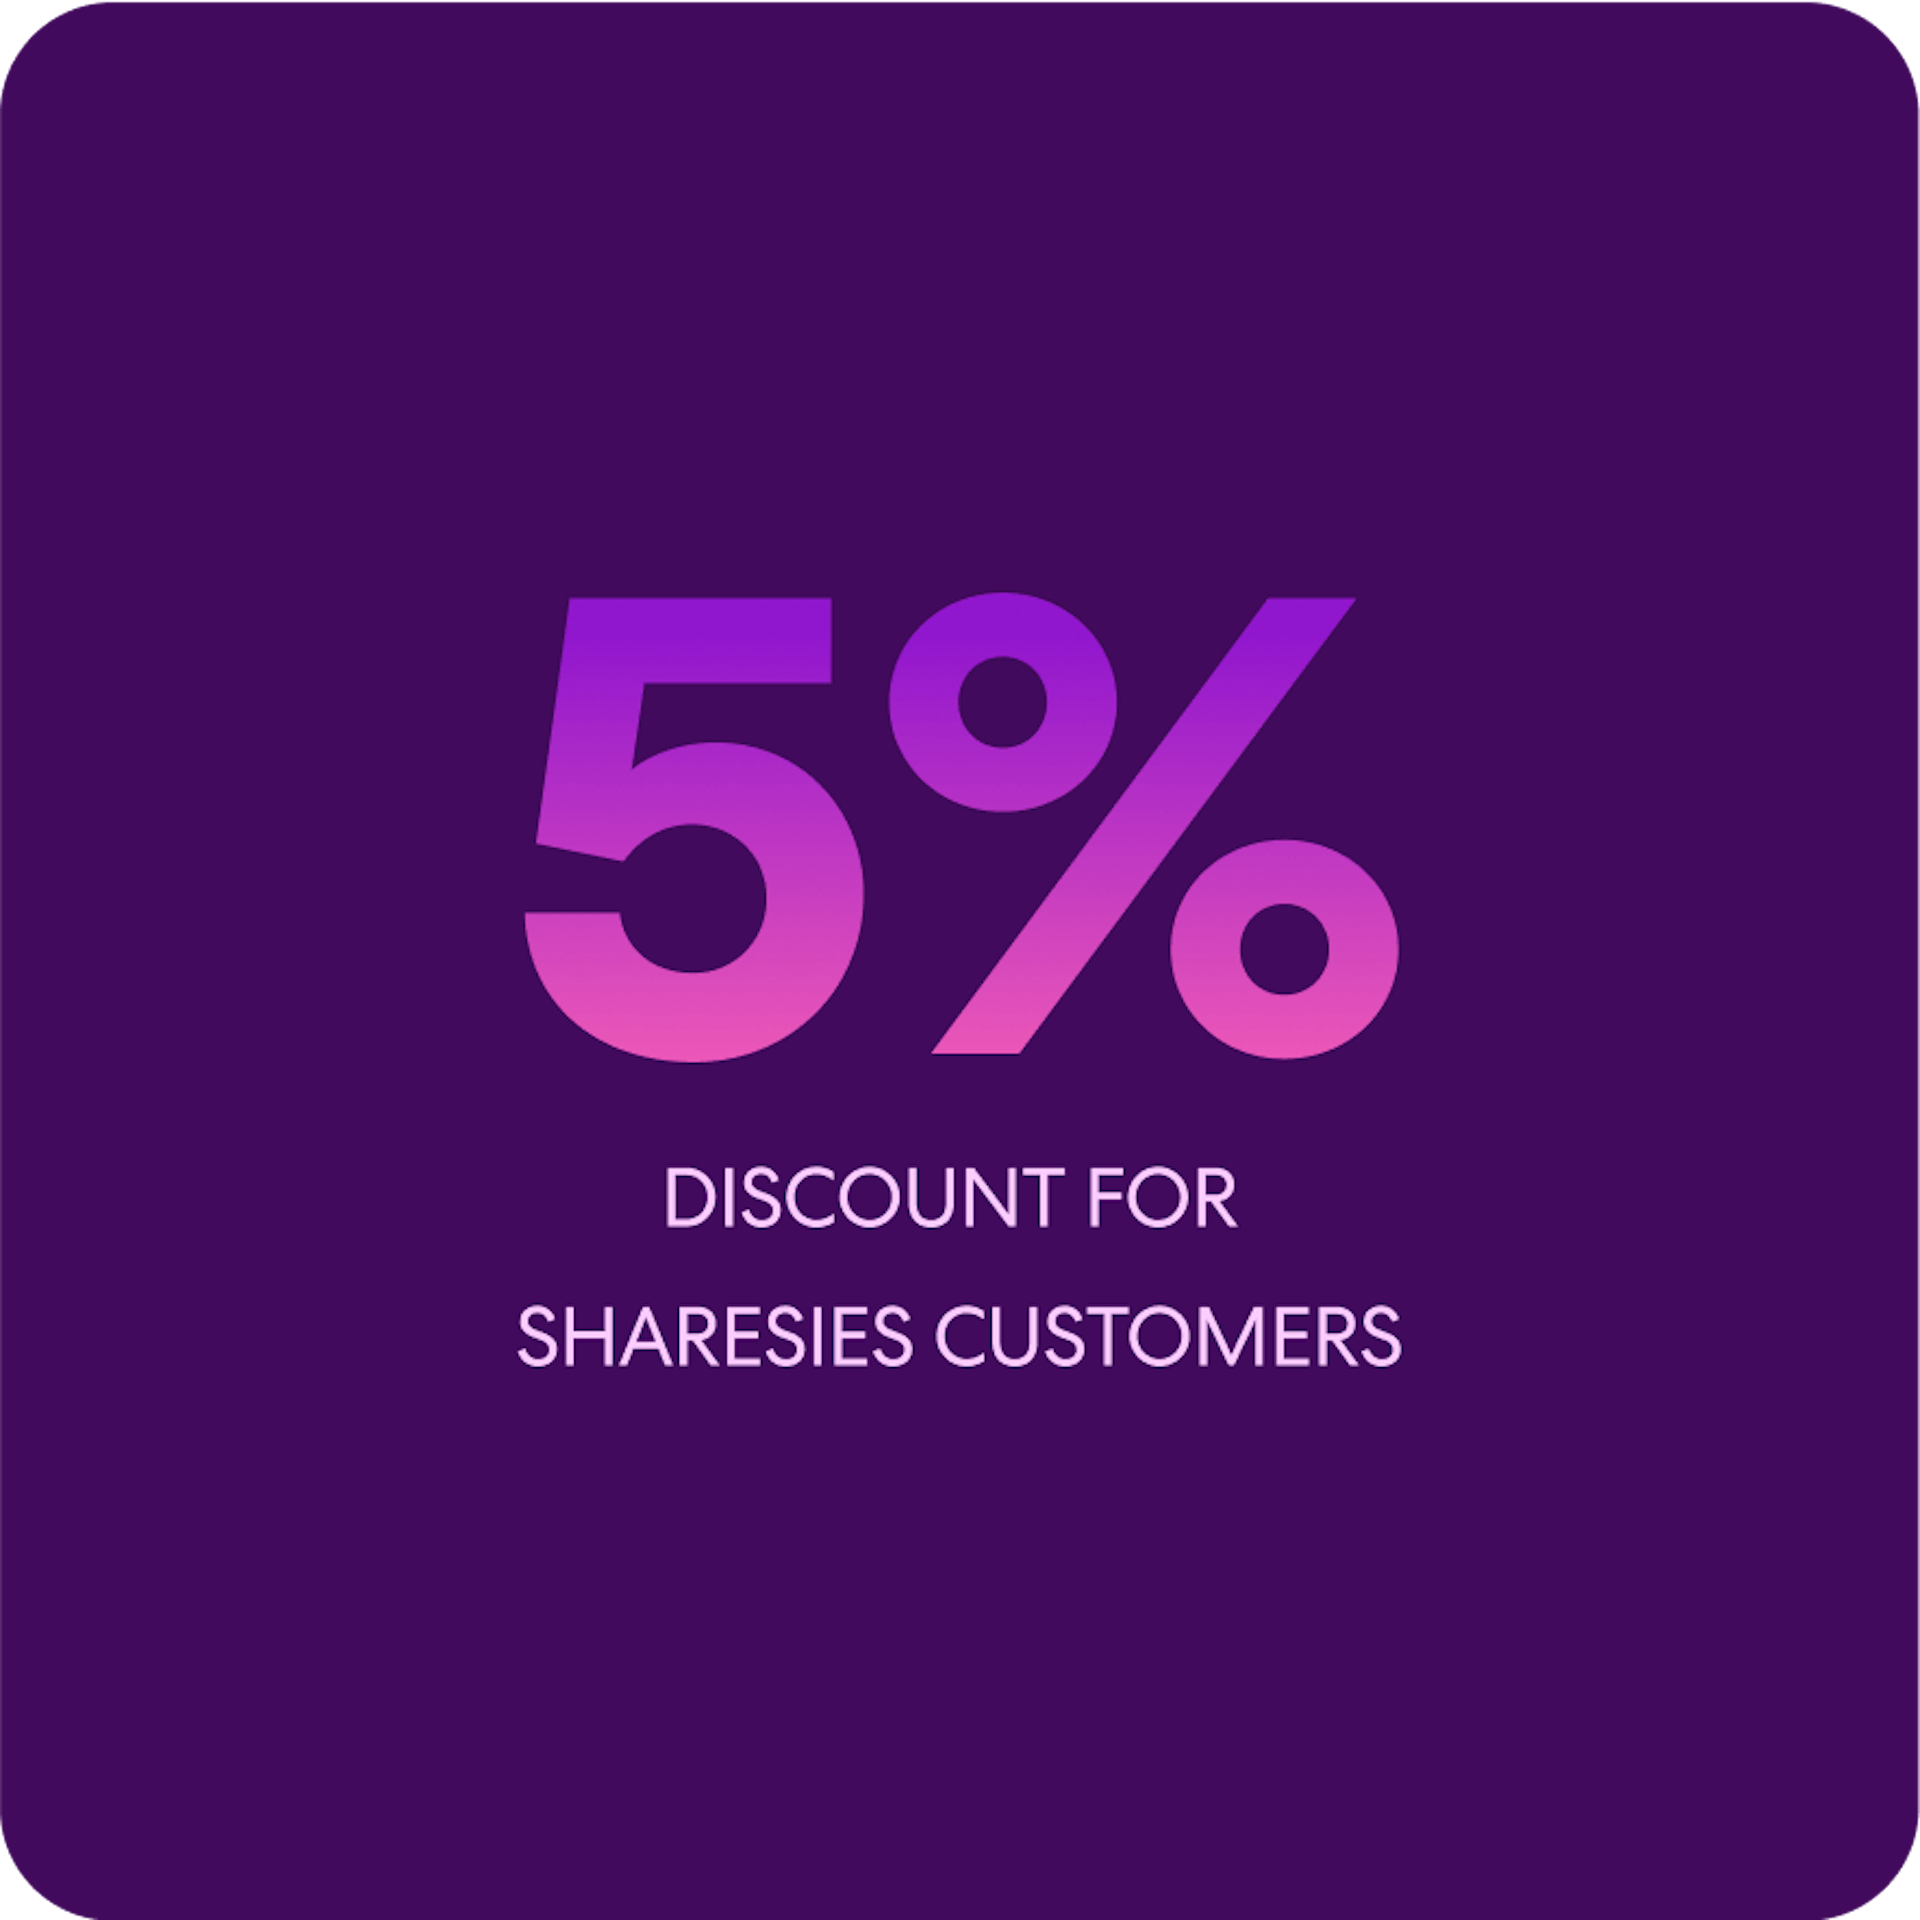 5% discount for Sharesies customers